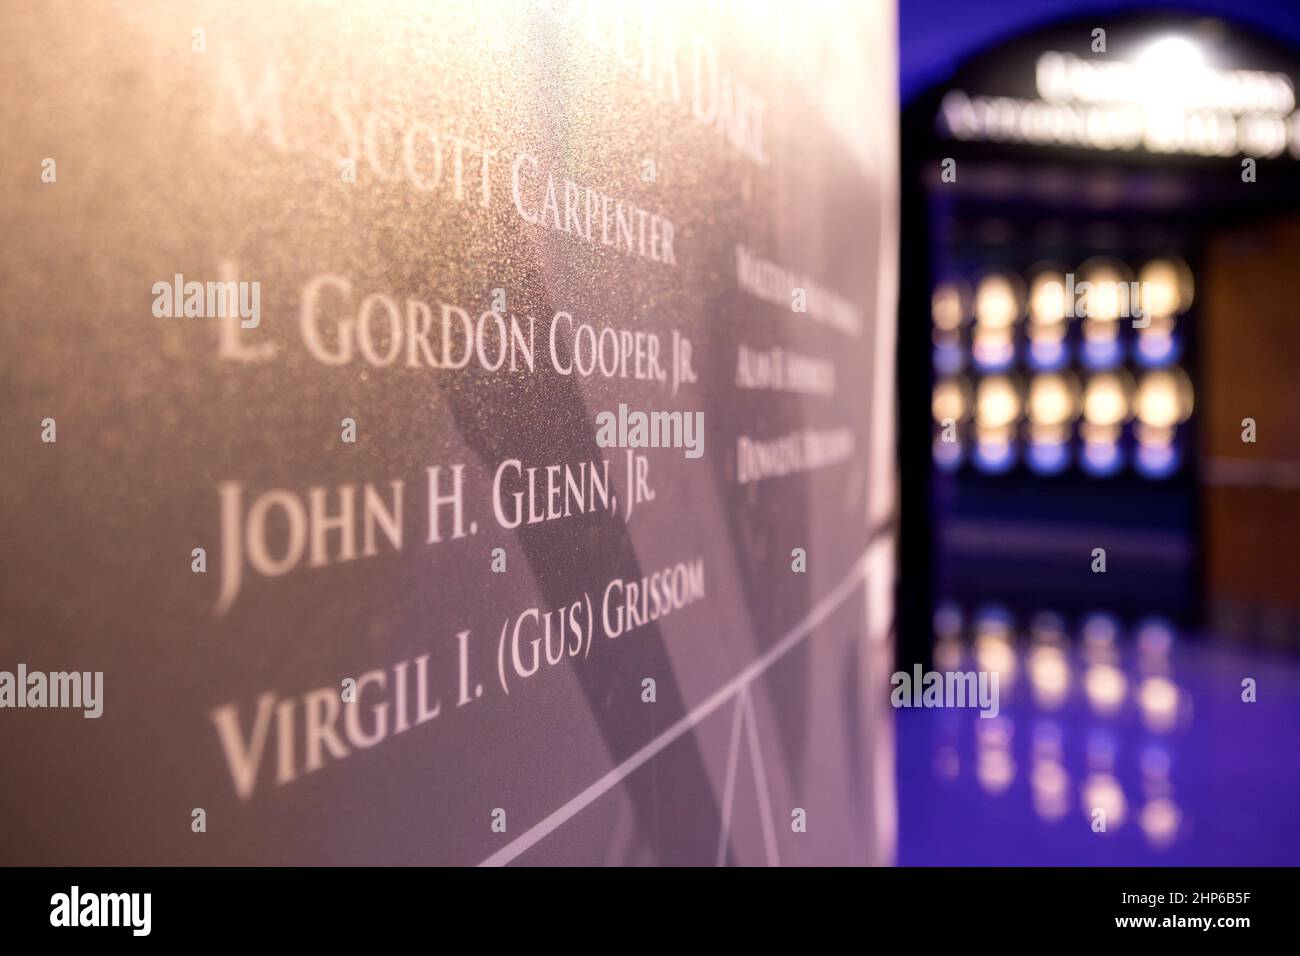 Wreath laying ceremony in honor of John H Glenn Jr. at the Hereos and Legends Exhibit located at the Kennedy Space Center Visitor Complex (KSCVC) ca. 2016 Stock Photo